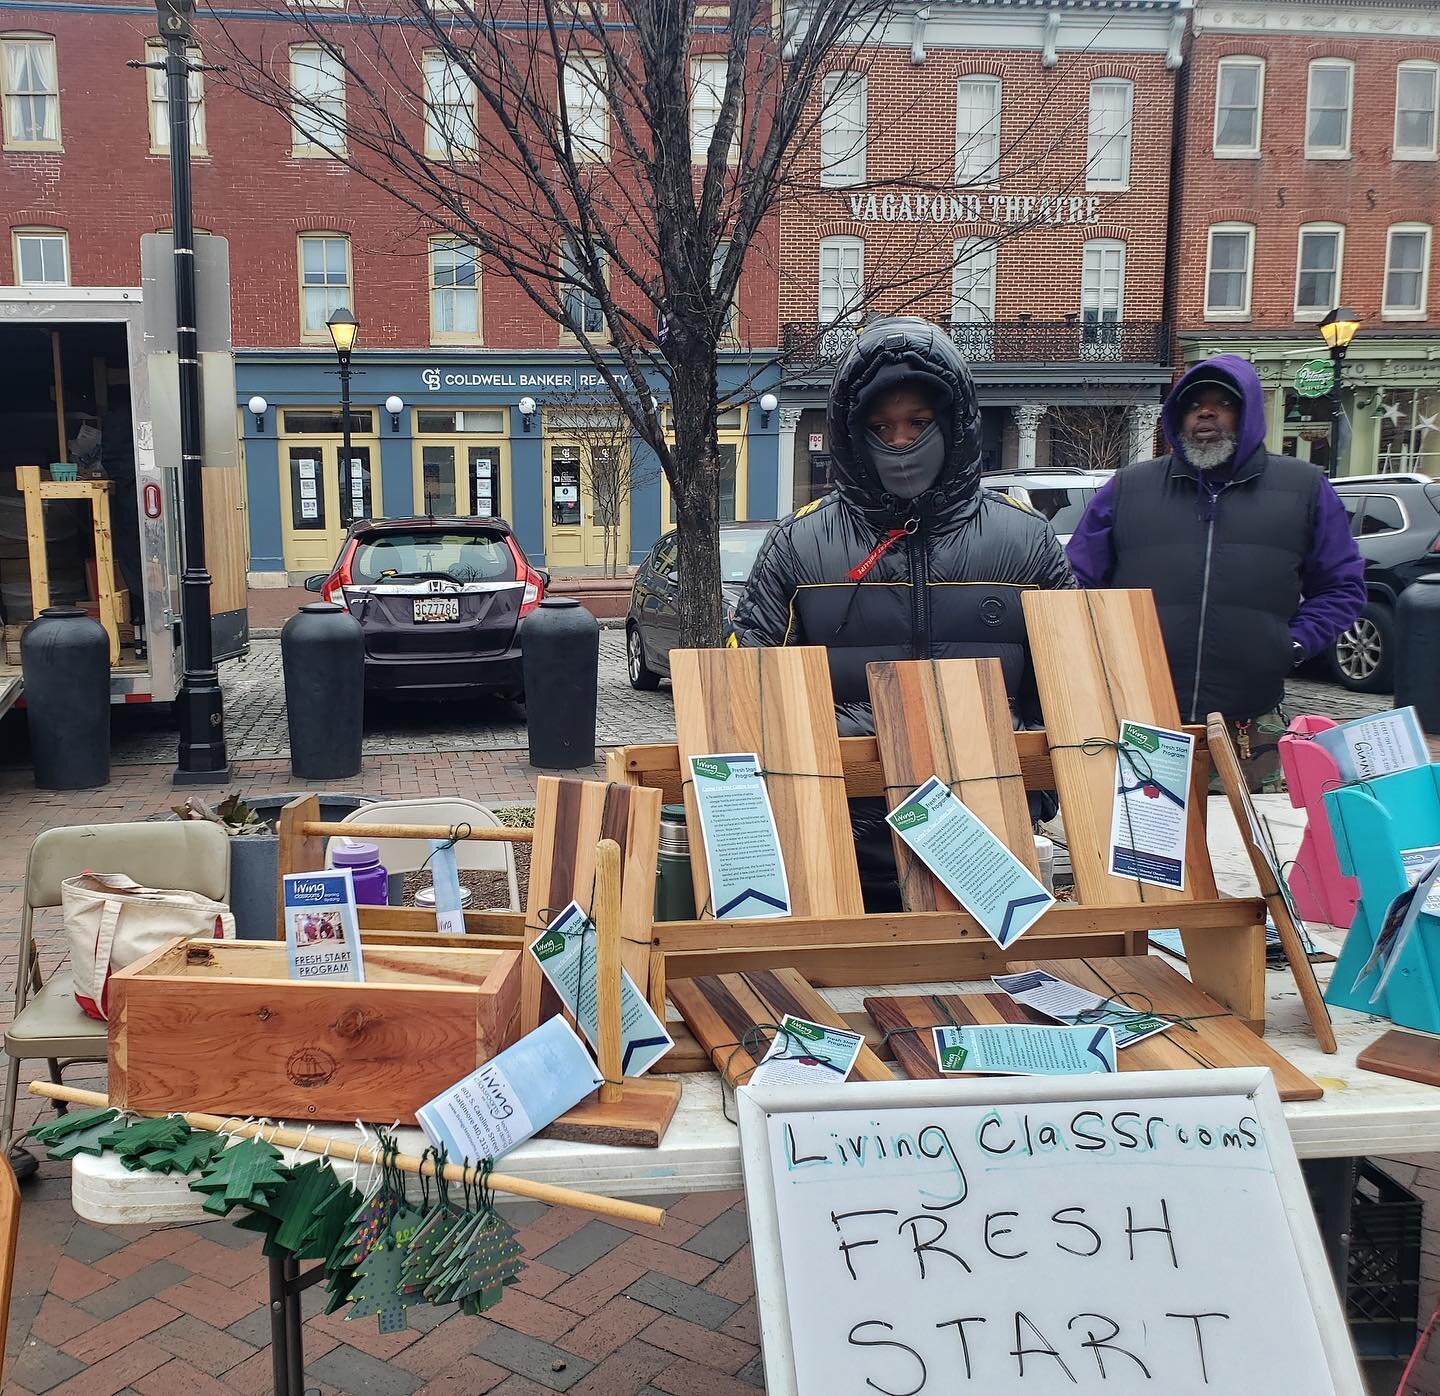 Next date: 1/28/23, 8:00AM to 12:30PM

Did you make a New Year&rsquo;s resolution to cook more or eat healthier? Fresh Start will be at the Fells Point Farmer&rsquo;s Market every other weekend selling their legendary cutting boards (along with some 